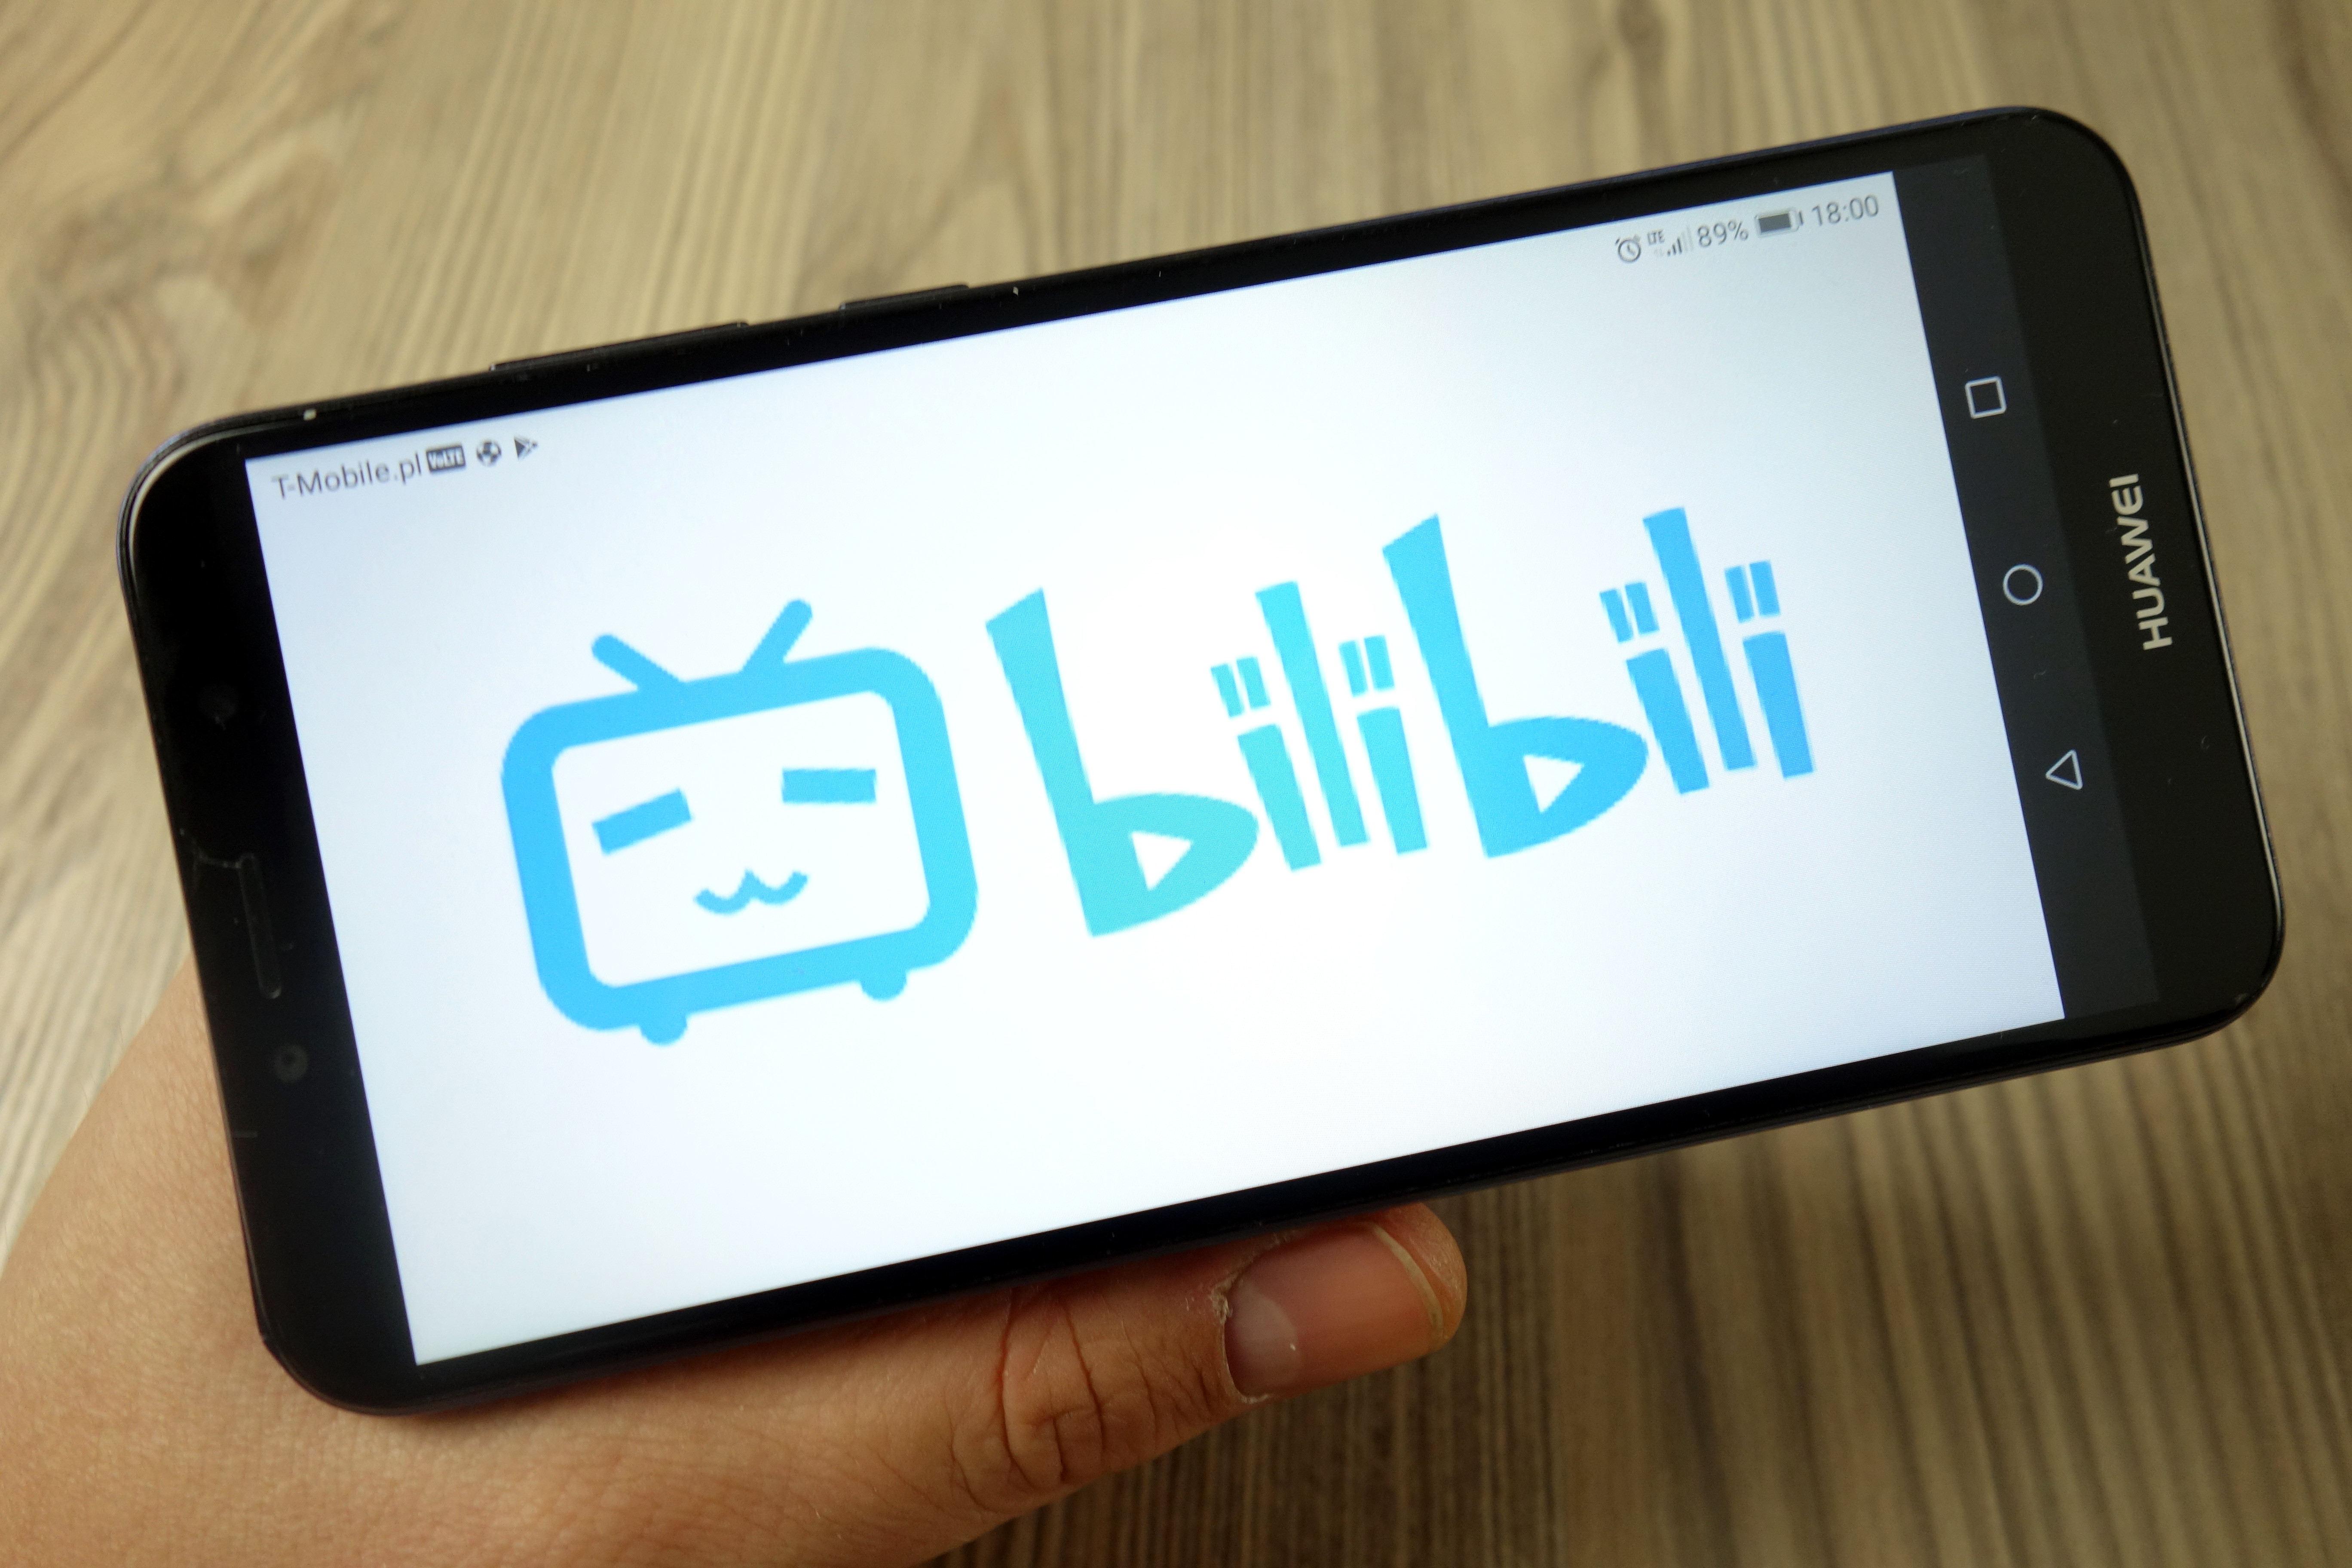 As Bilibili prepares for its second listing in Hong Kong, the streaming platform is dealing with a culture war between the anime fans who made the company successful and newer users helping diversify its content offerings. Photo: Shutterstock